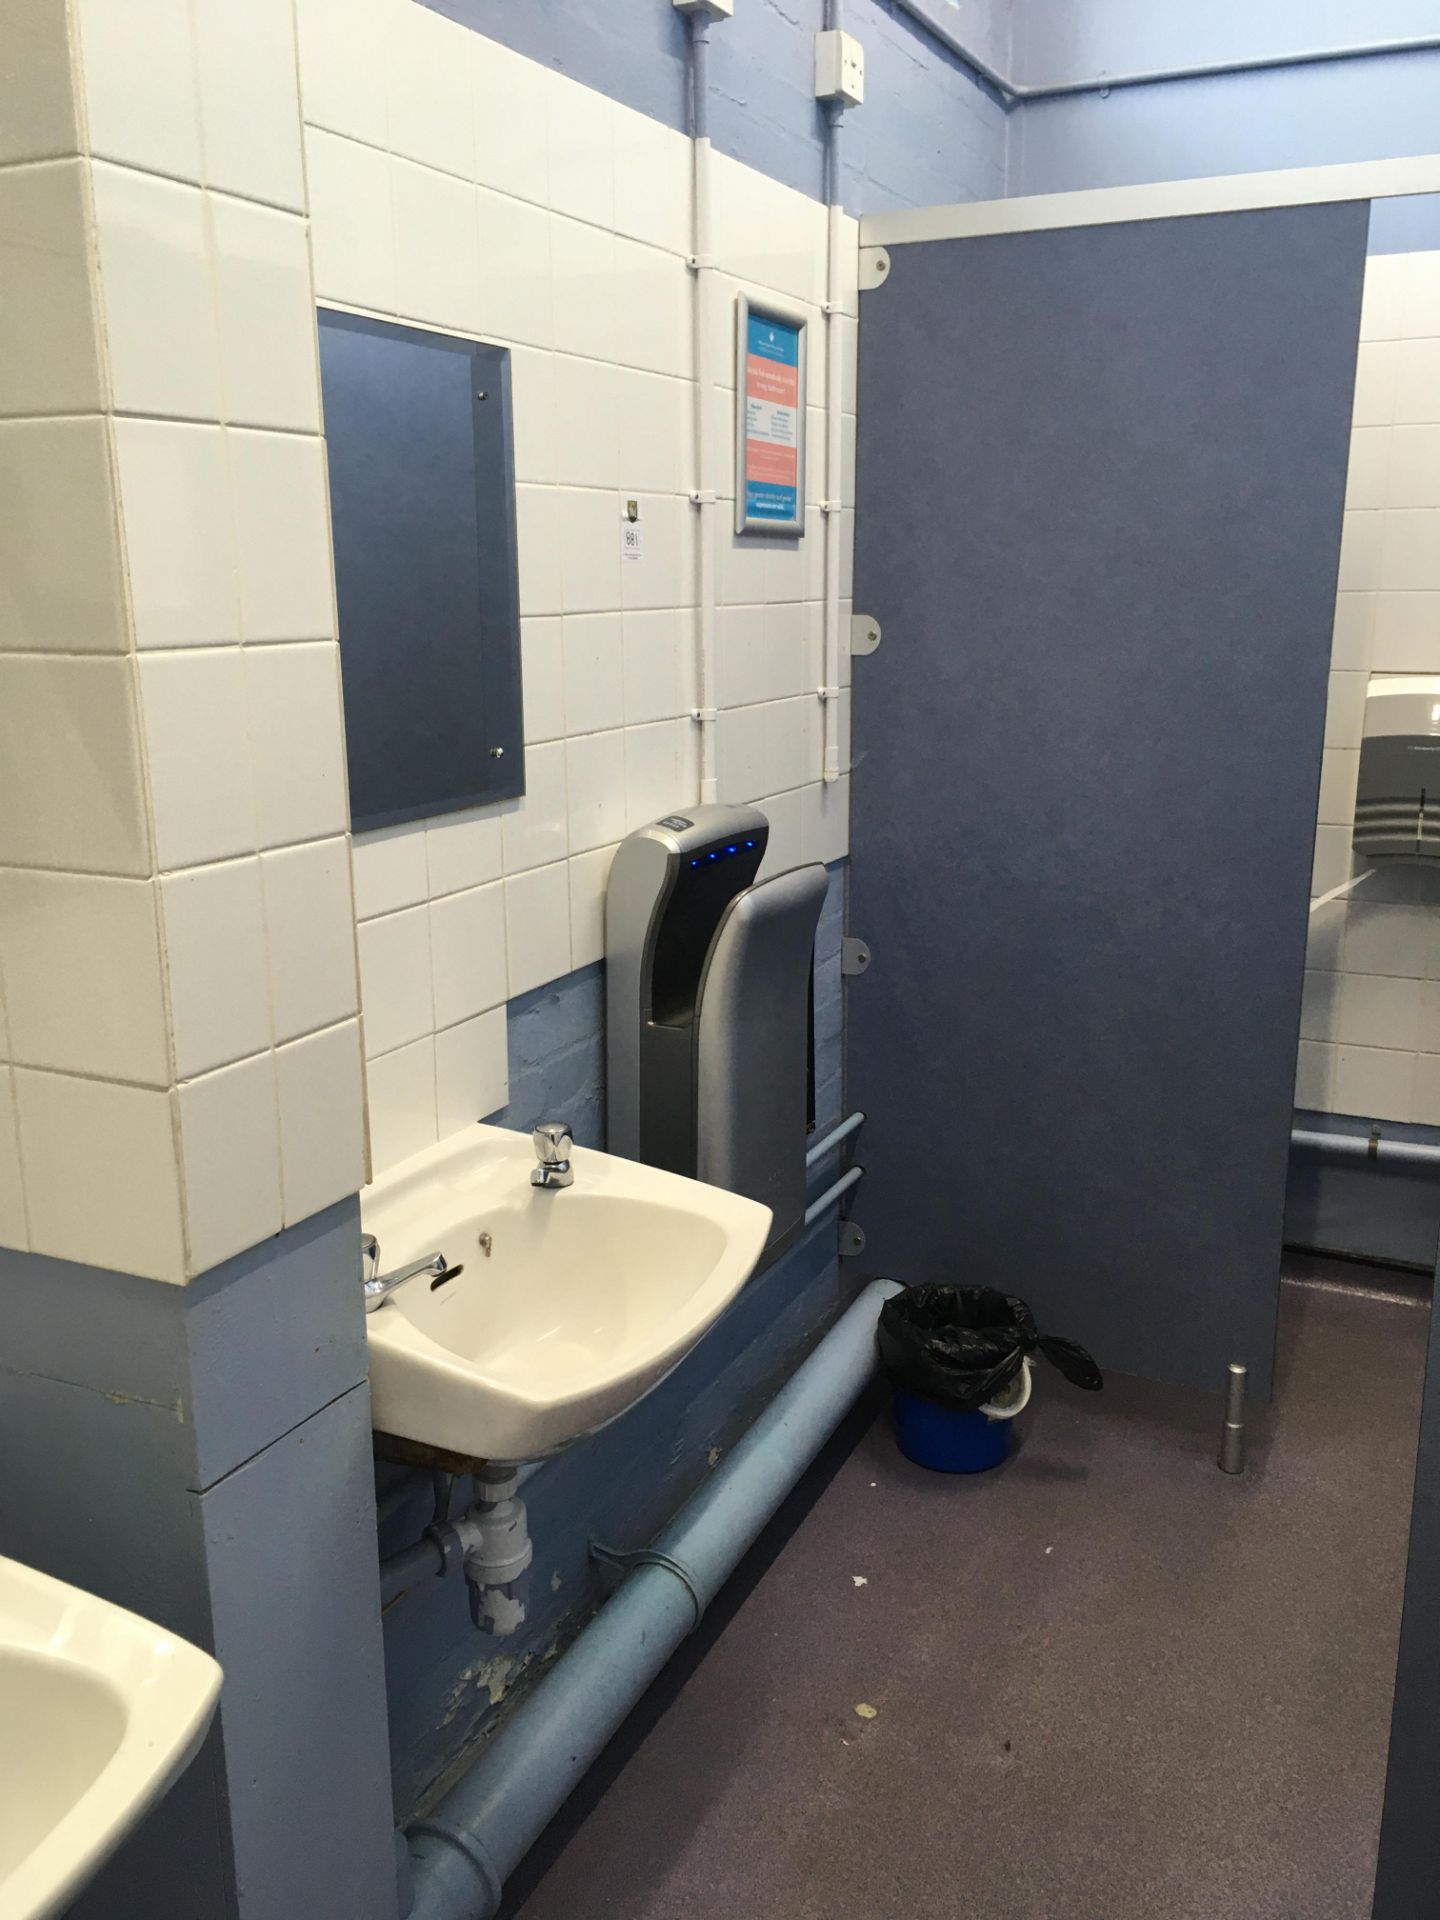 Contents of the gents toilet, 3 x urinals, 3 x sinks, hand drier, 3 x mirrors, 1 x cubicle - Image 5 of 5